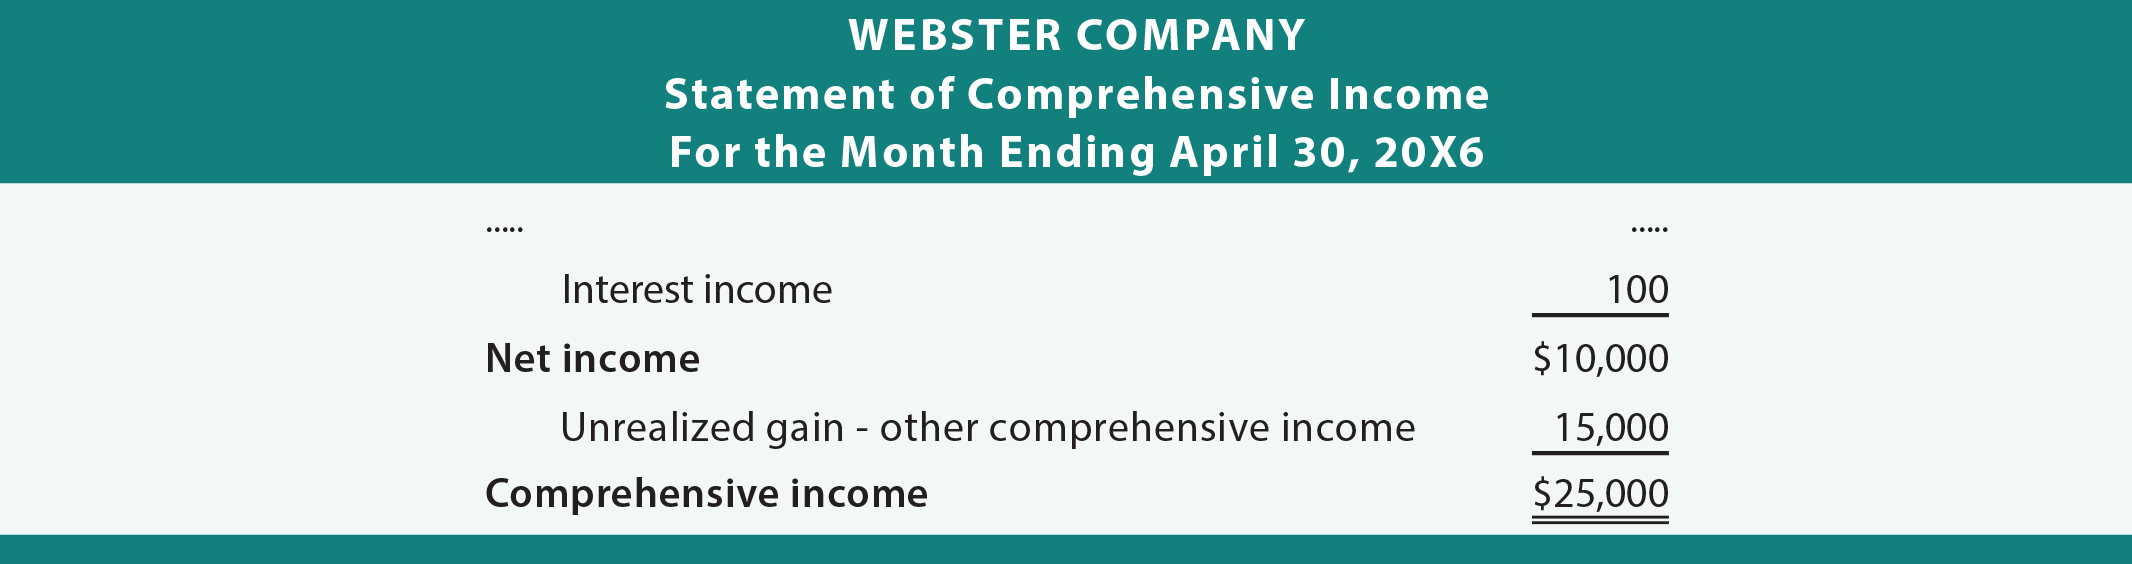 Webster Income Statement